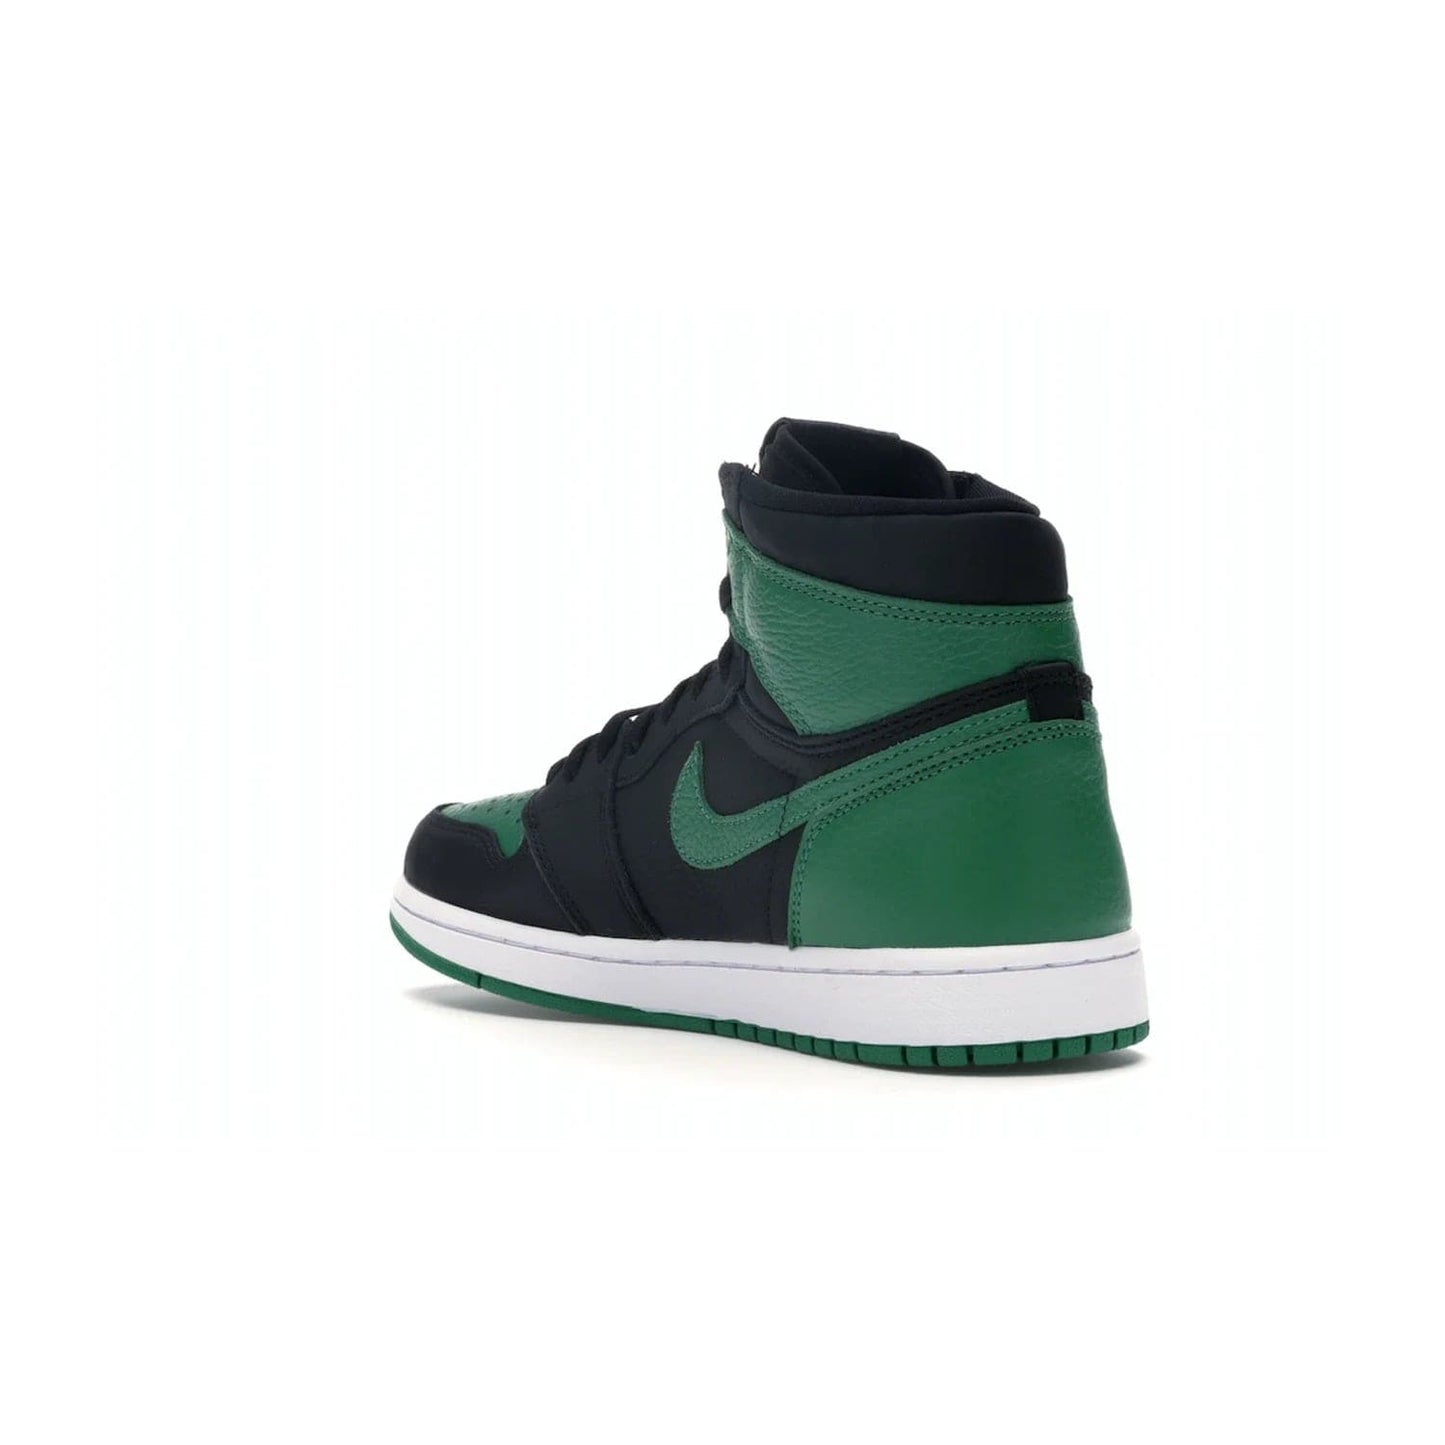 Jordan 1 Retro High Pine Green Black - Image 24 - Only at www.BallersClubKickz.com - Step into fresh style with the Jordan 1 Retro High Pine Green Black. Combining a black tumbled leather upper with green leather overlays, this sneaker features a Gym Red embroidered tongue tag, sail midsole, and pine green outsole for iconic style with a unique twist.